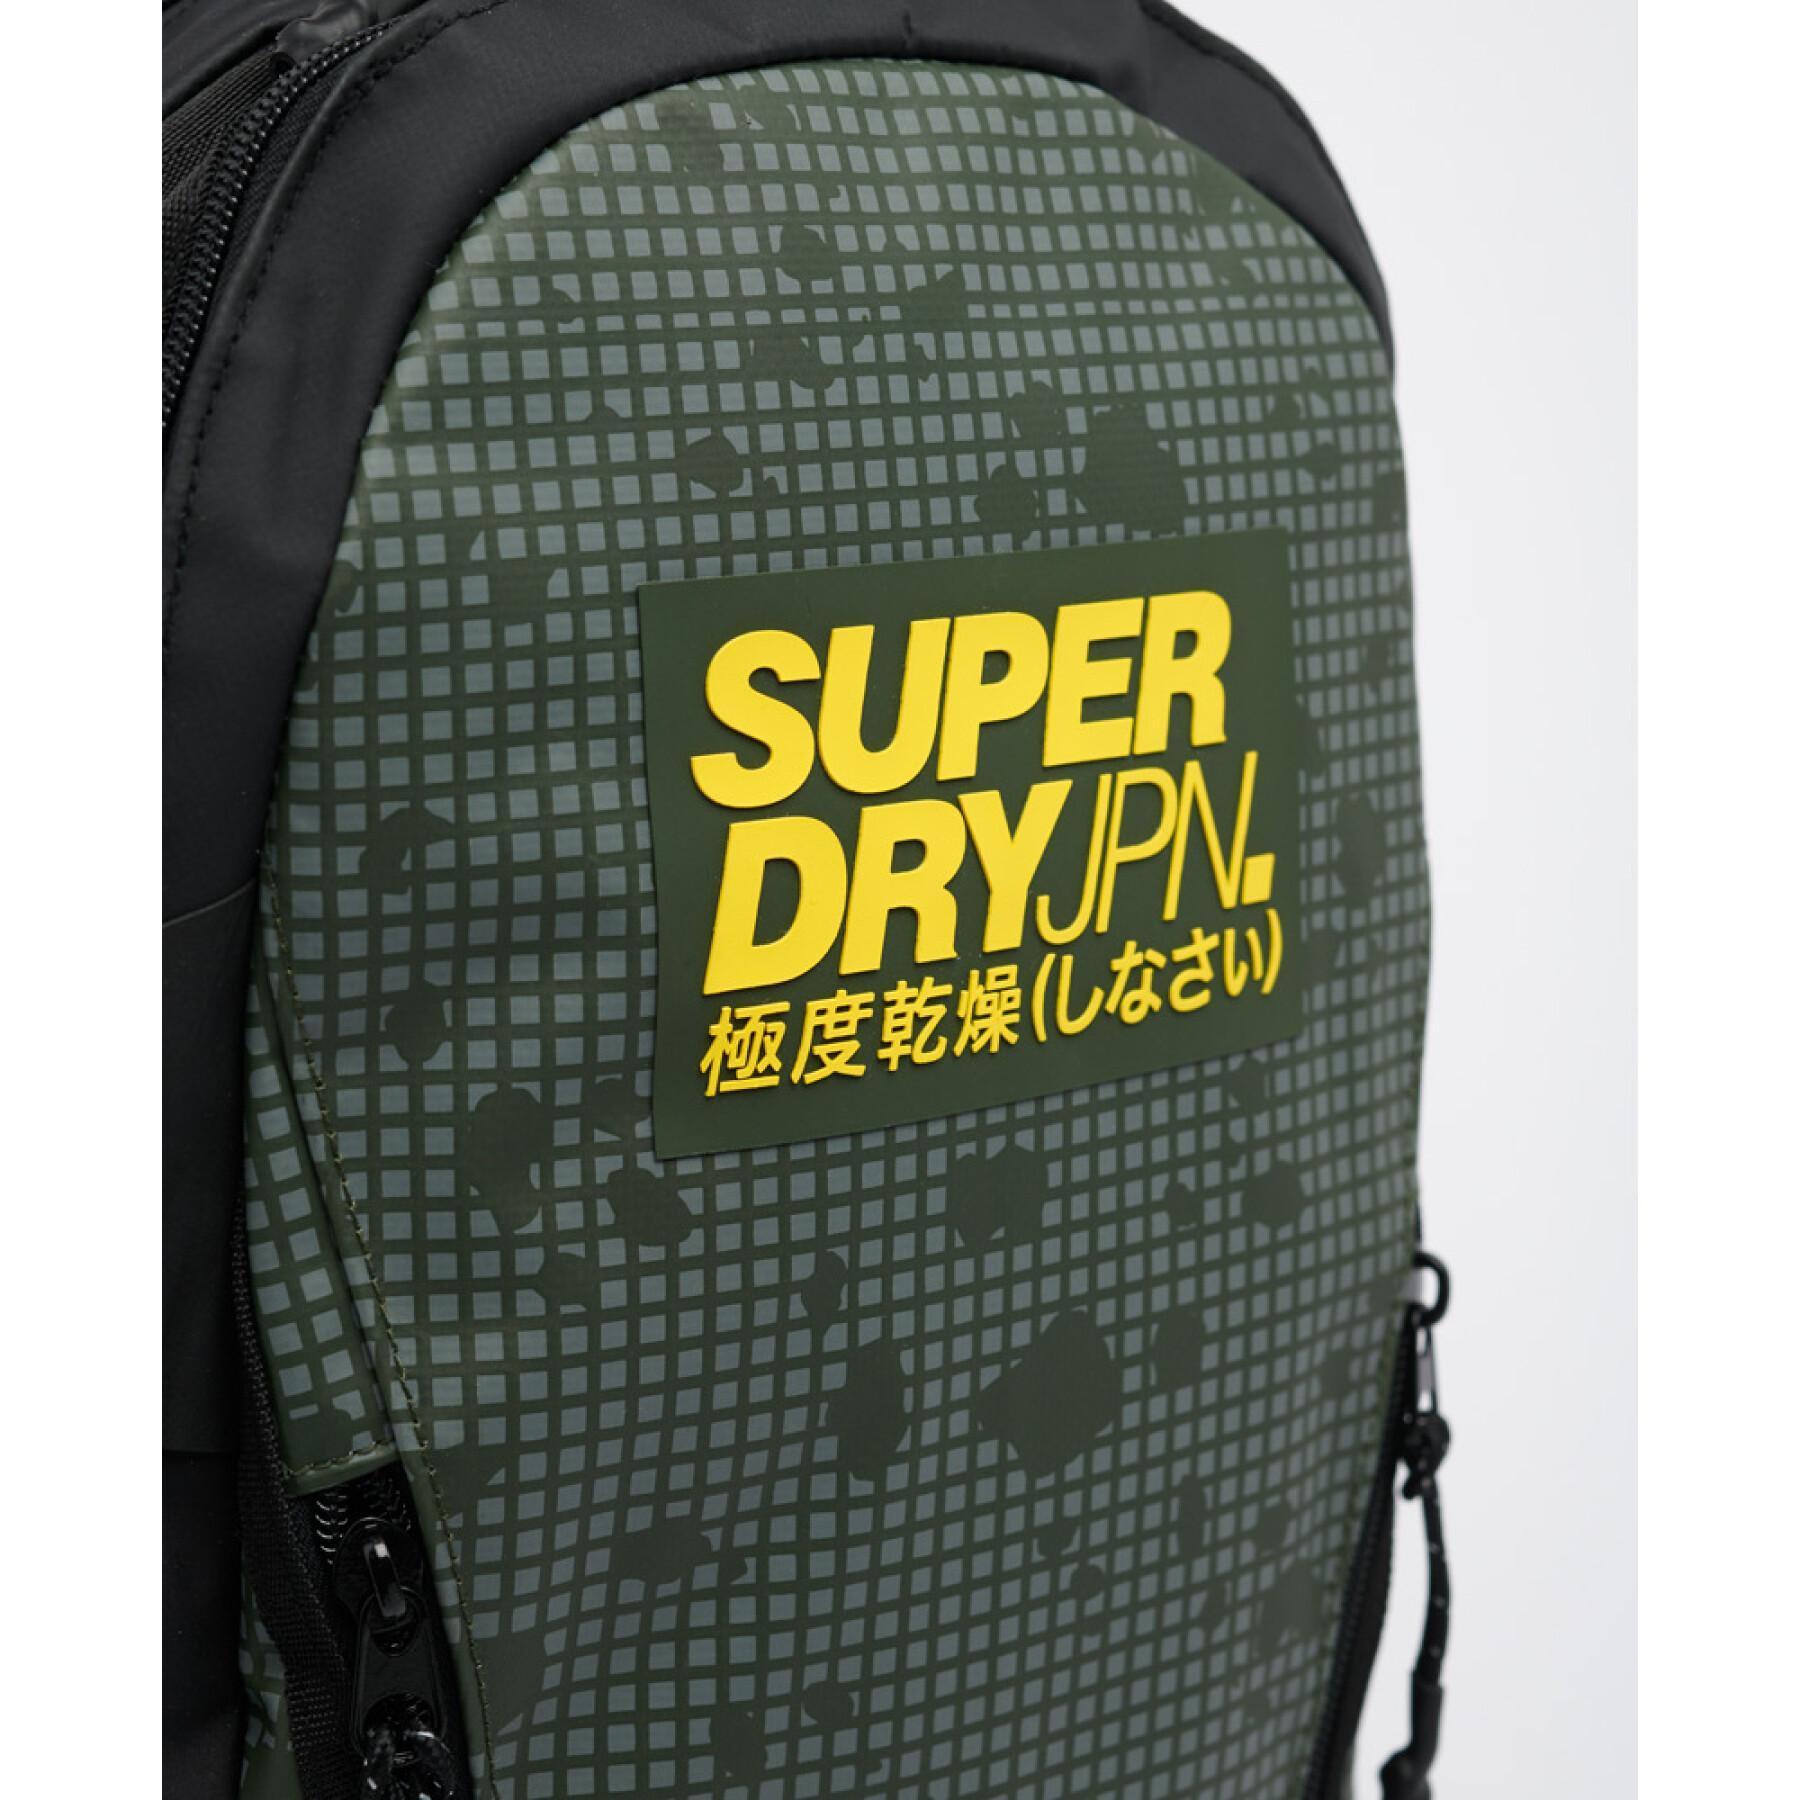 Backpack Superdry Classic Tarp